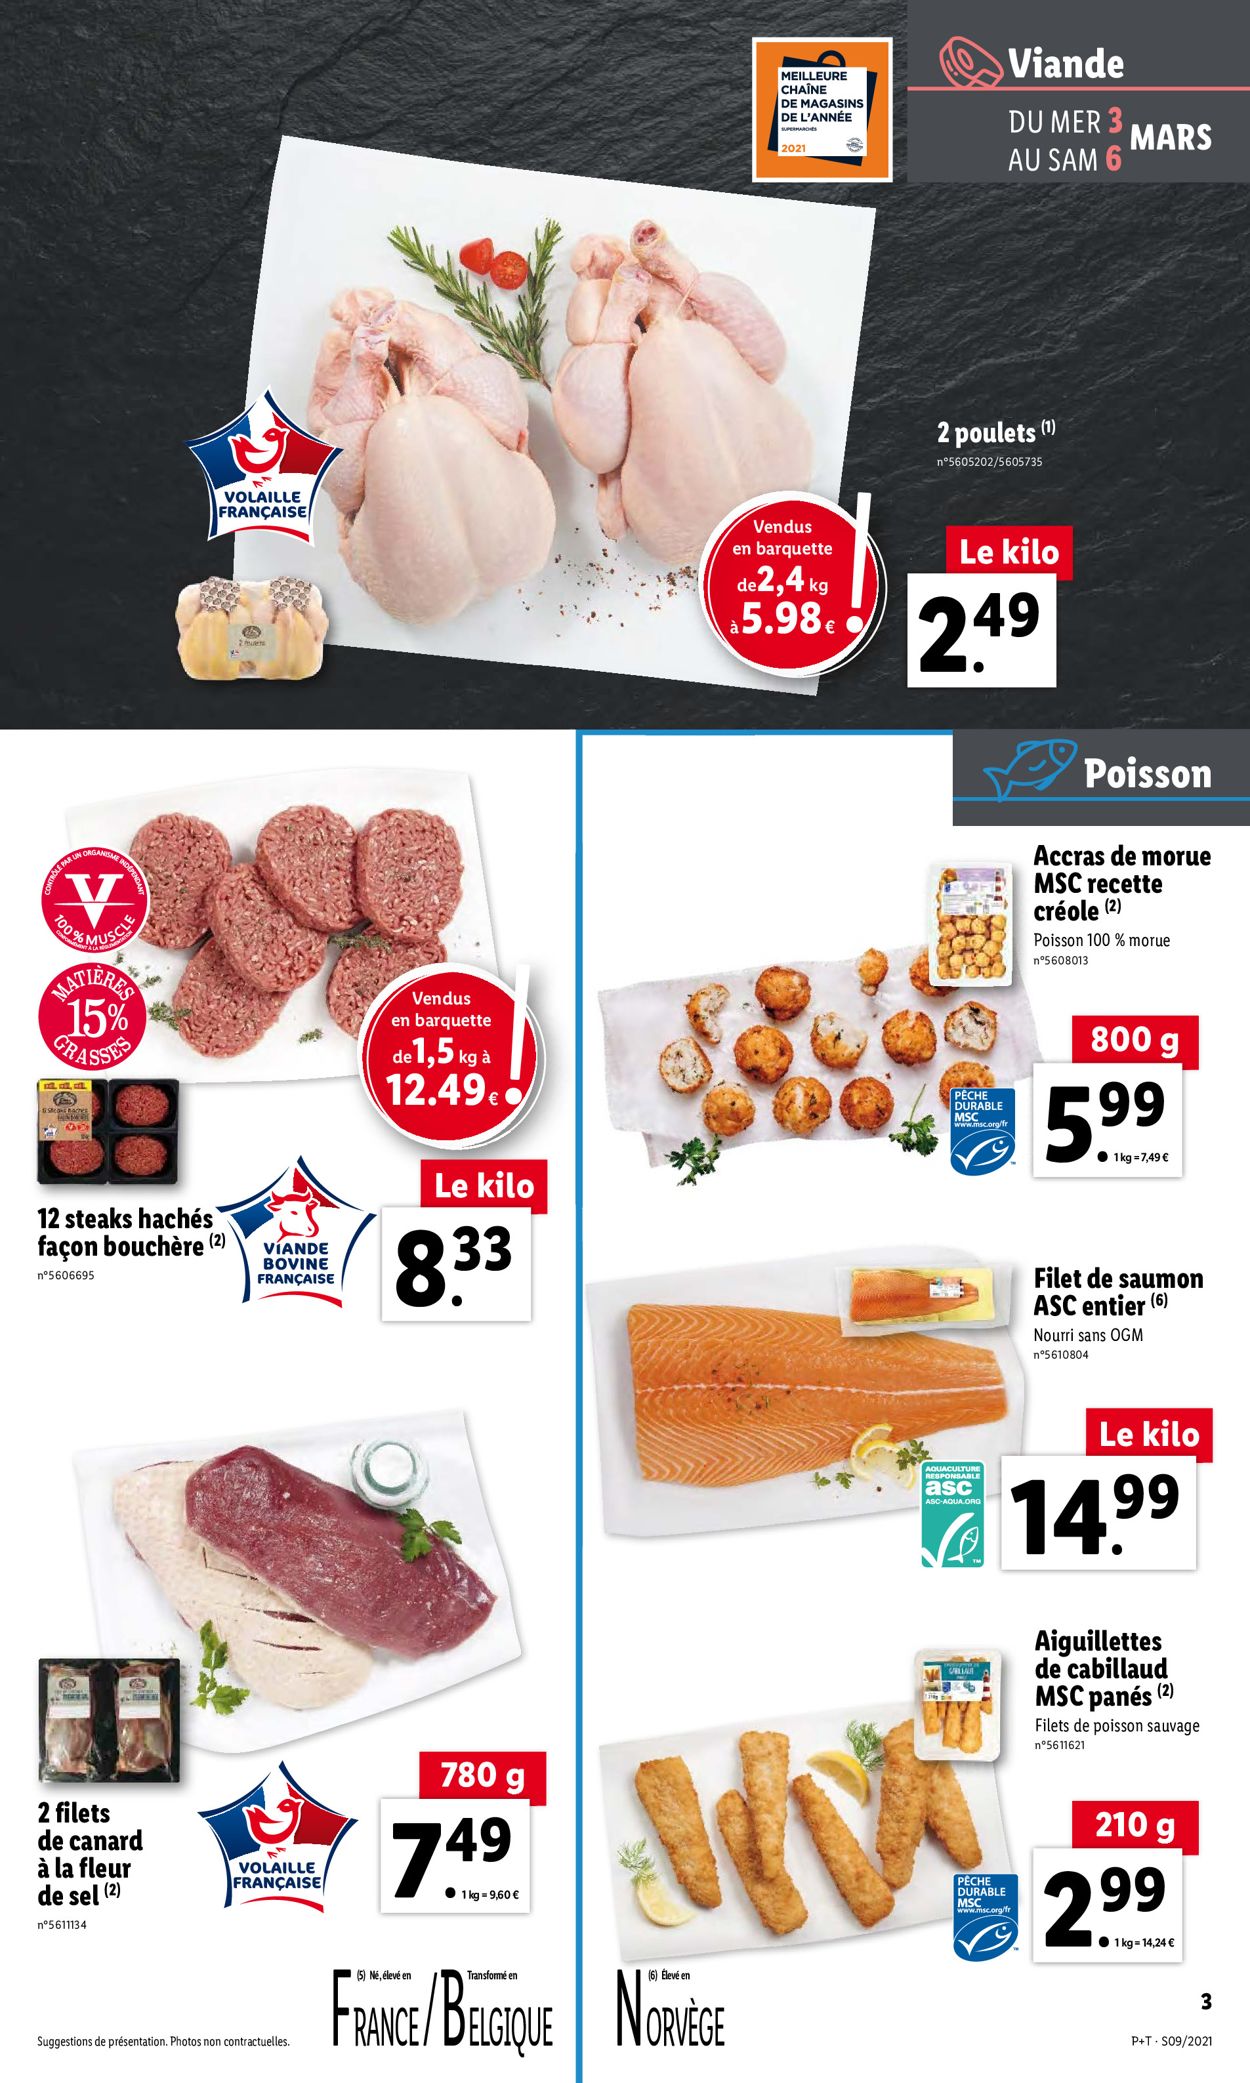 Lidl Catalogue - 03.03-09.03.2021 (Page 3)